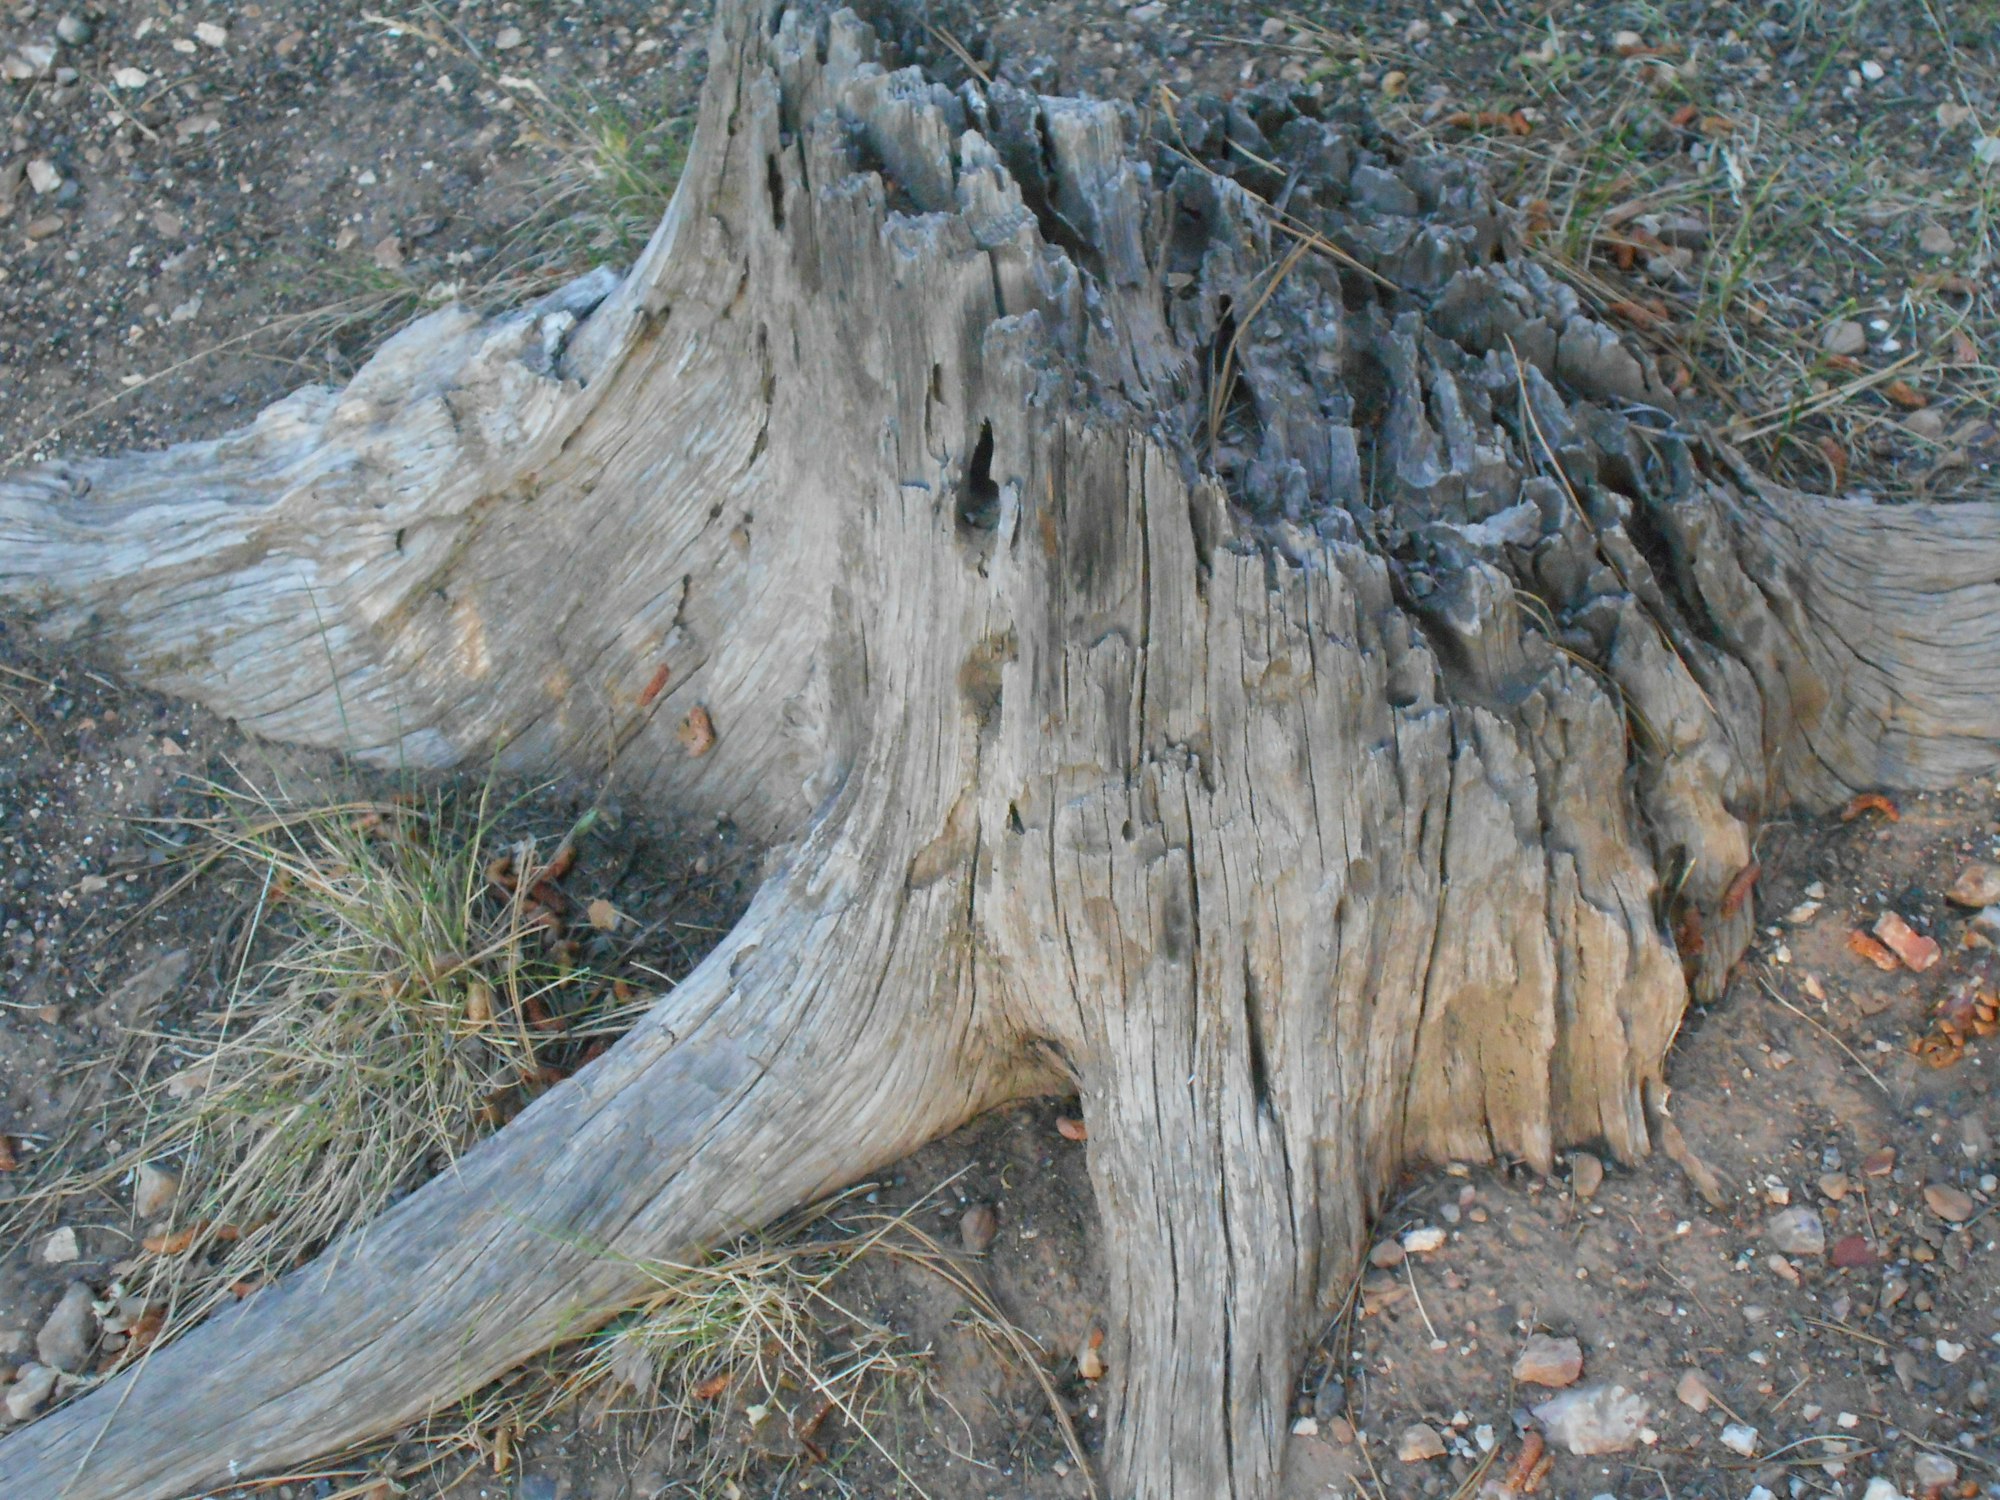 Beauty in Nature! Old Gnarled Tree Stump!